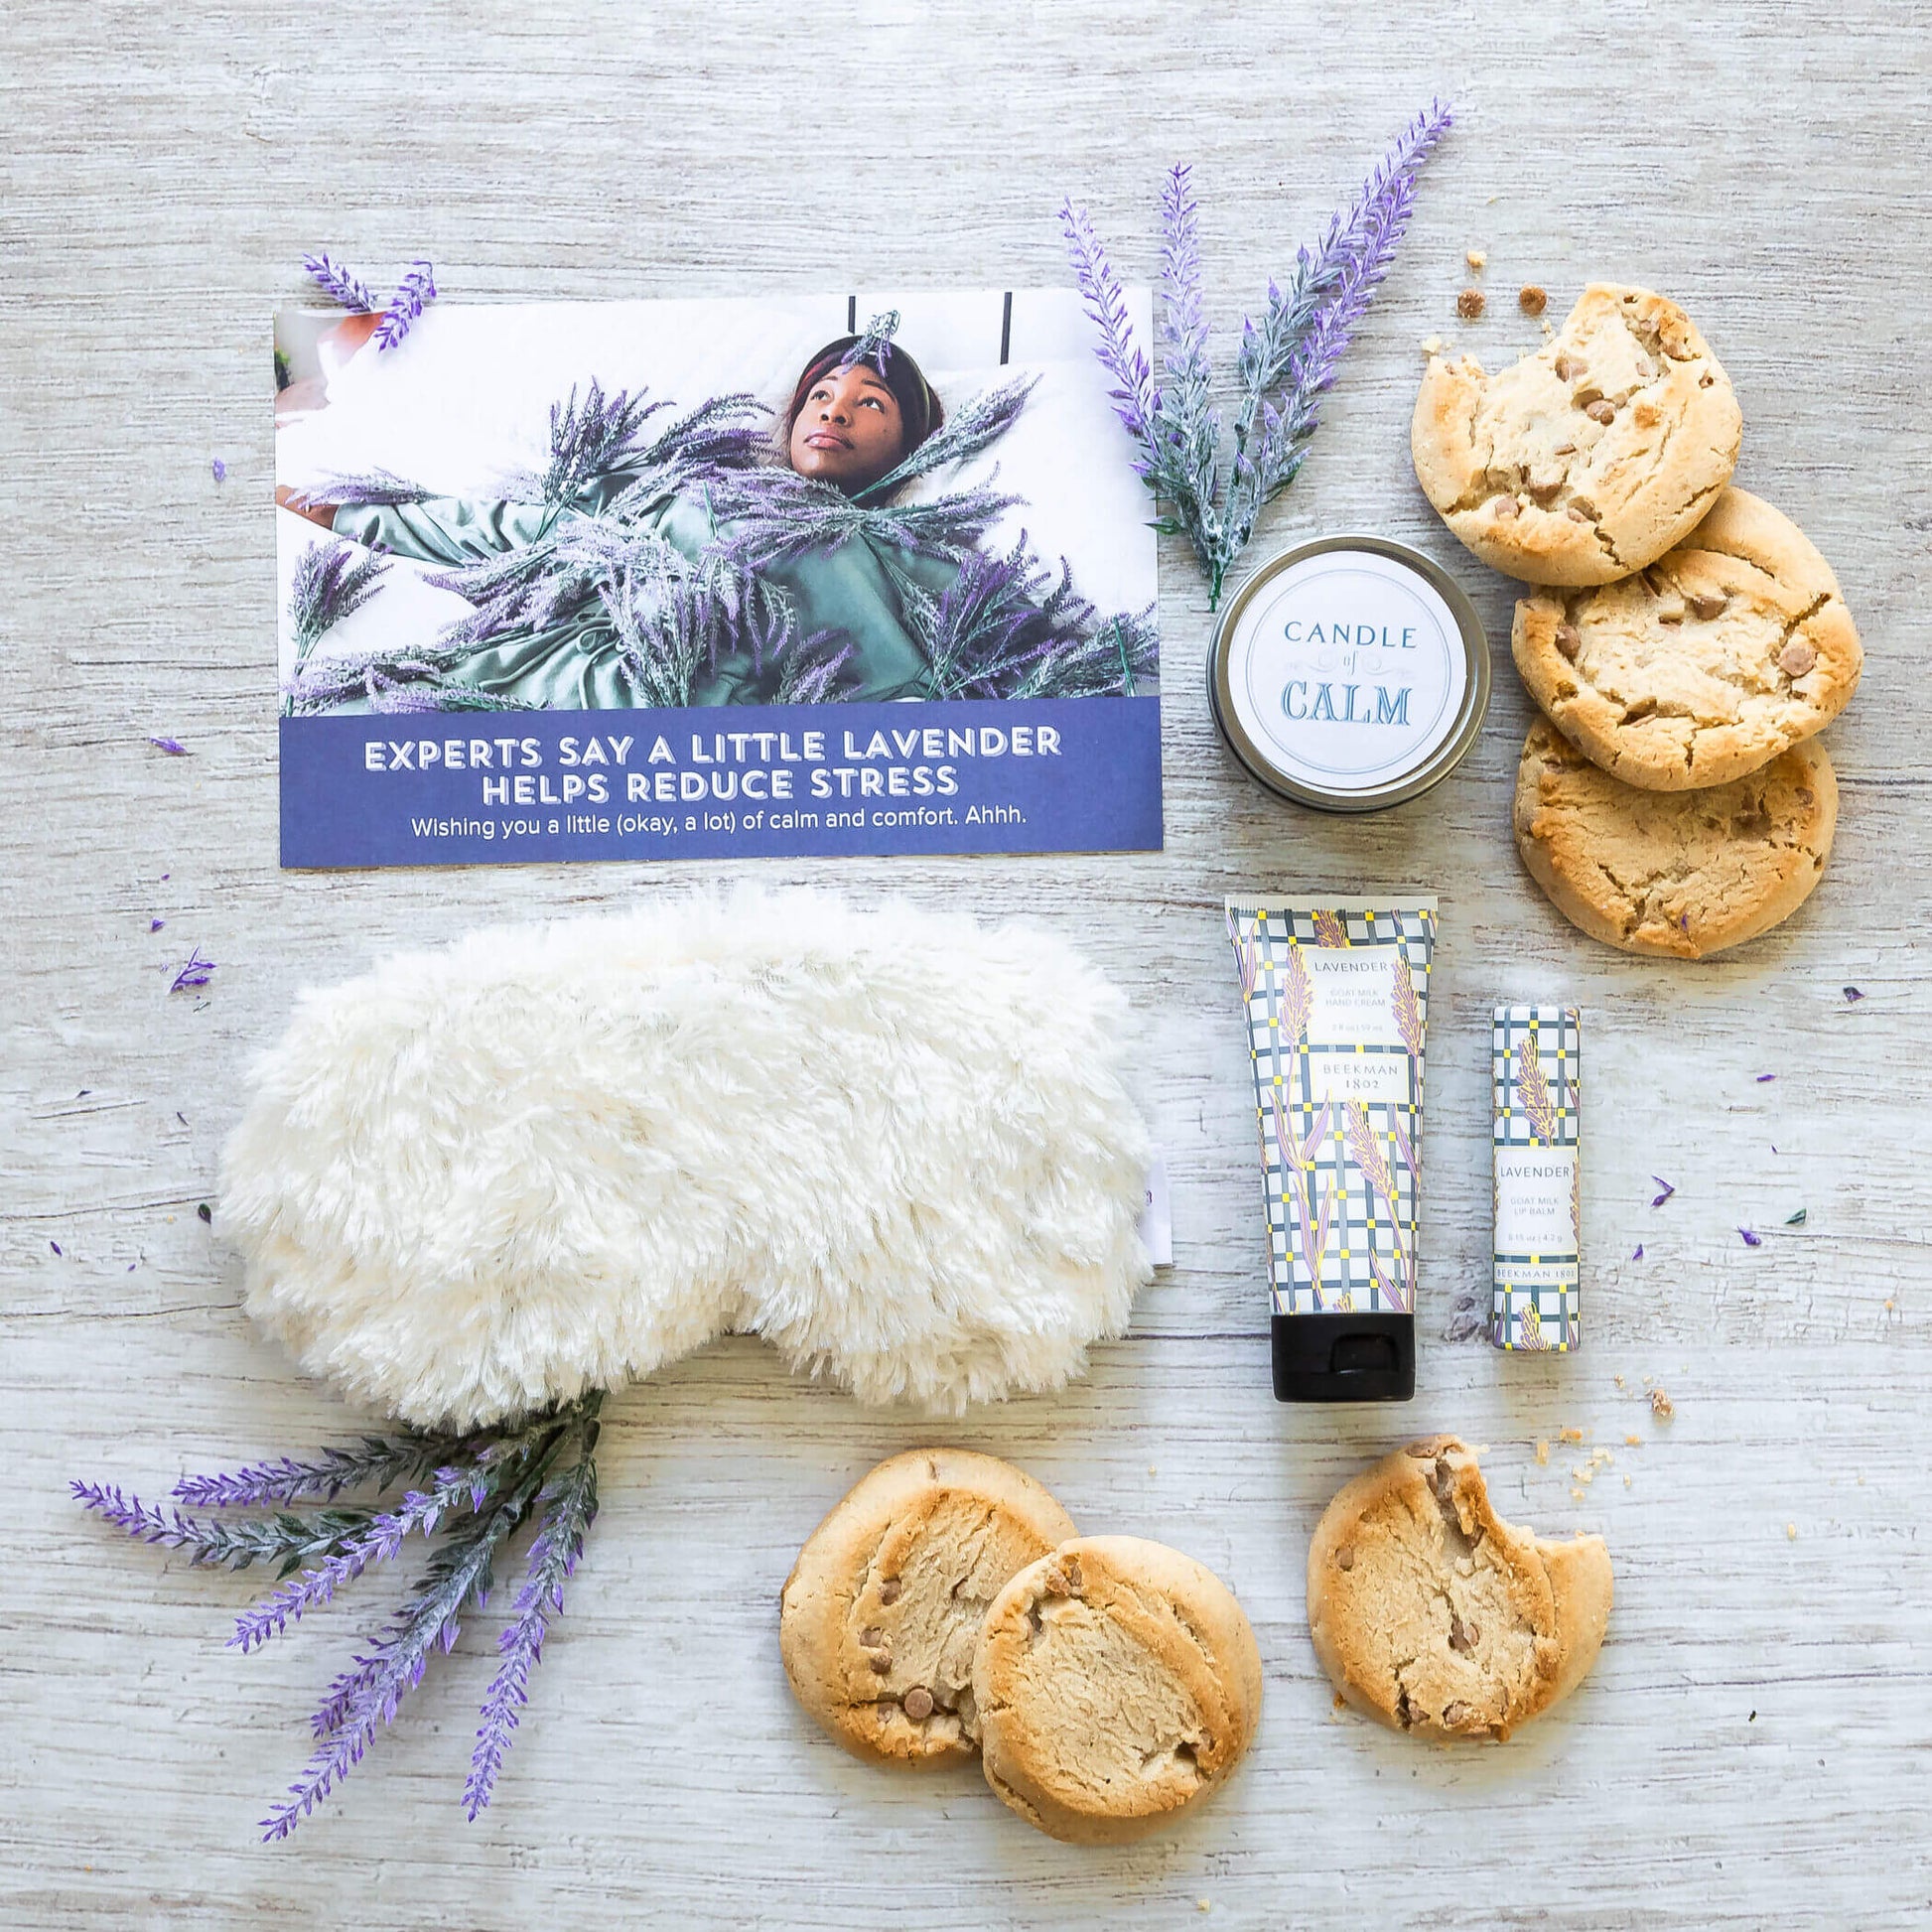 meme lavender package: Rolls, relax candle, lavender hand lotion and lip balm, fuzzy eye mask surrounding insert card that reads: Experts say a little lavender helps reduce stress. Also have decorative lavender probs